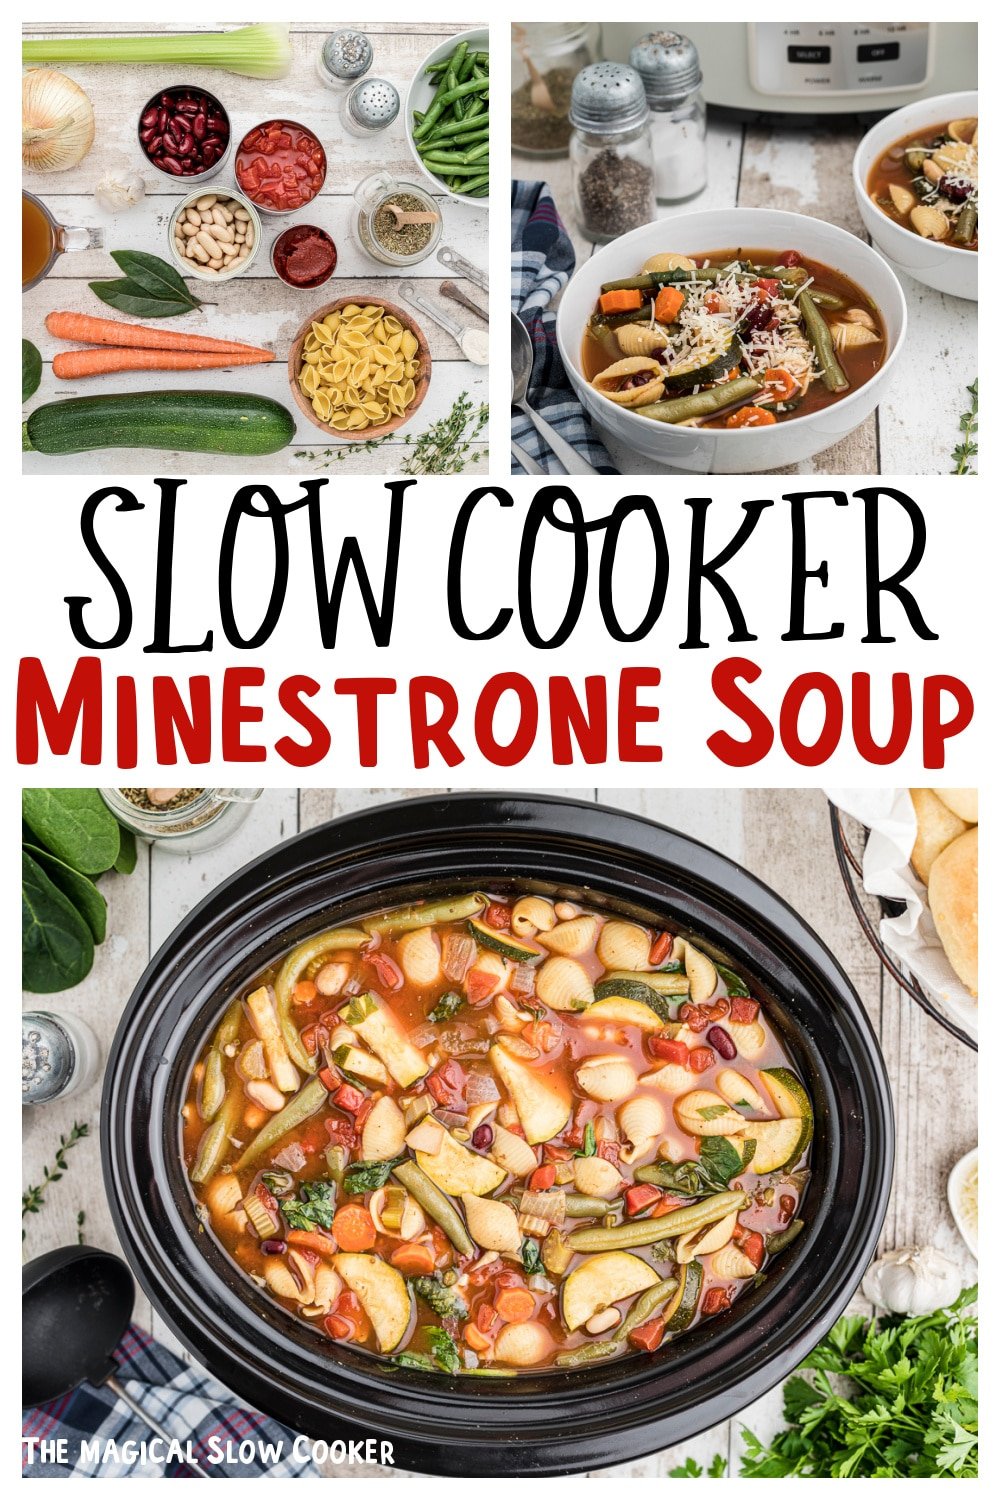 The Best Slow Cooker Minestrone Soup - The Magical Slow Cooker